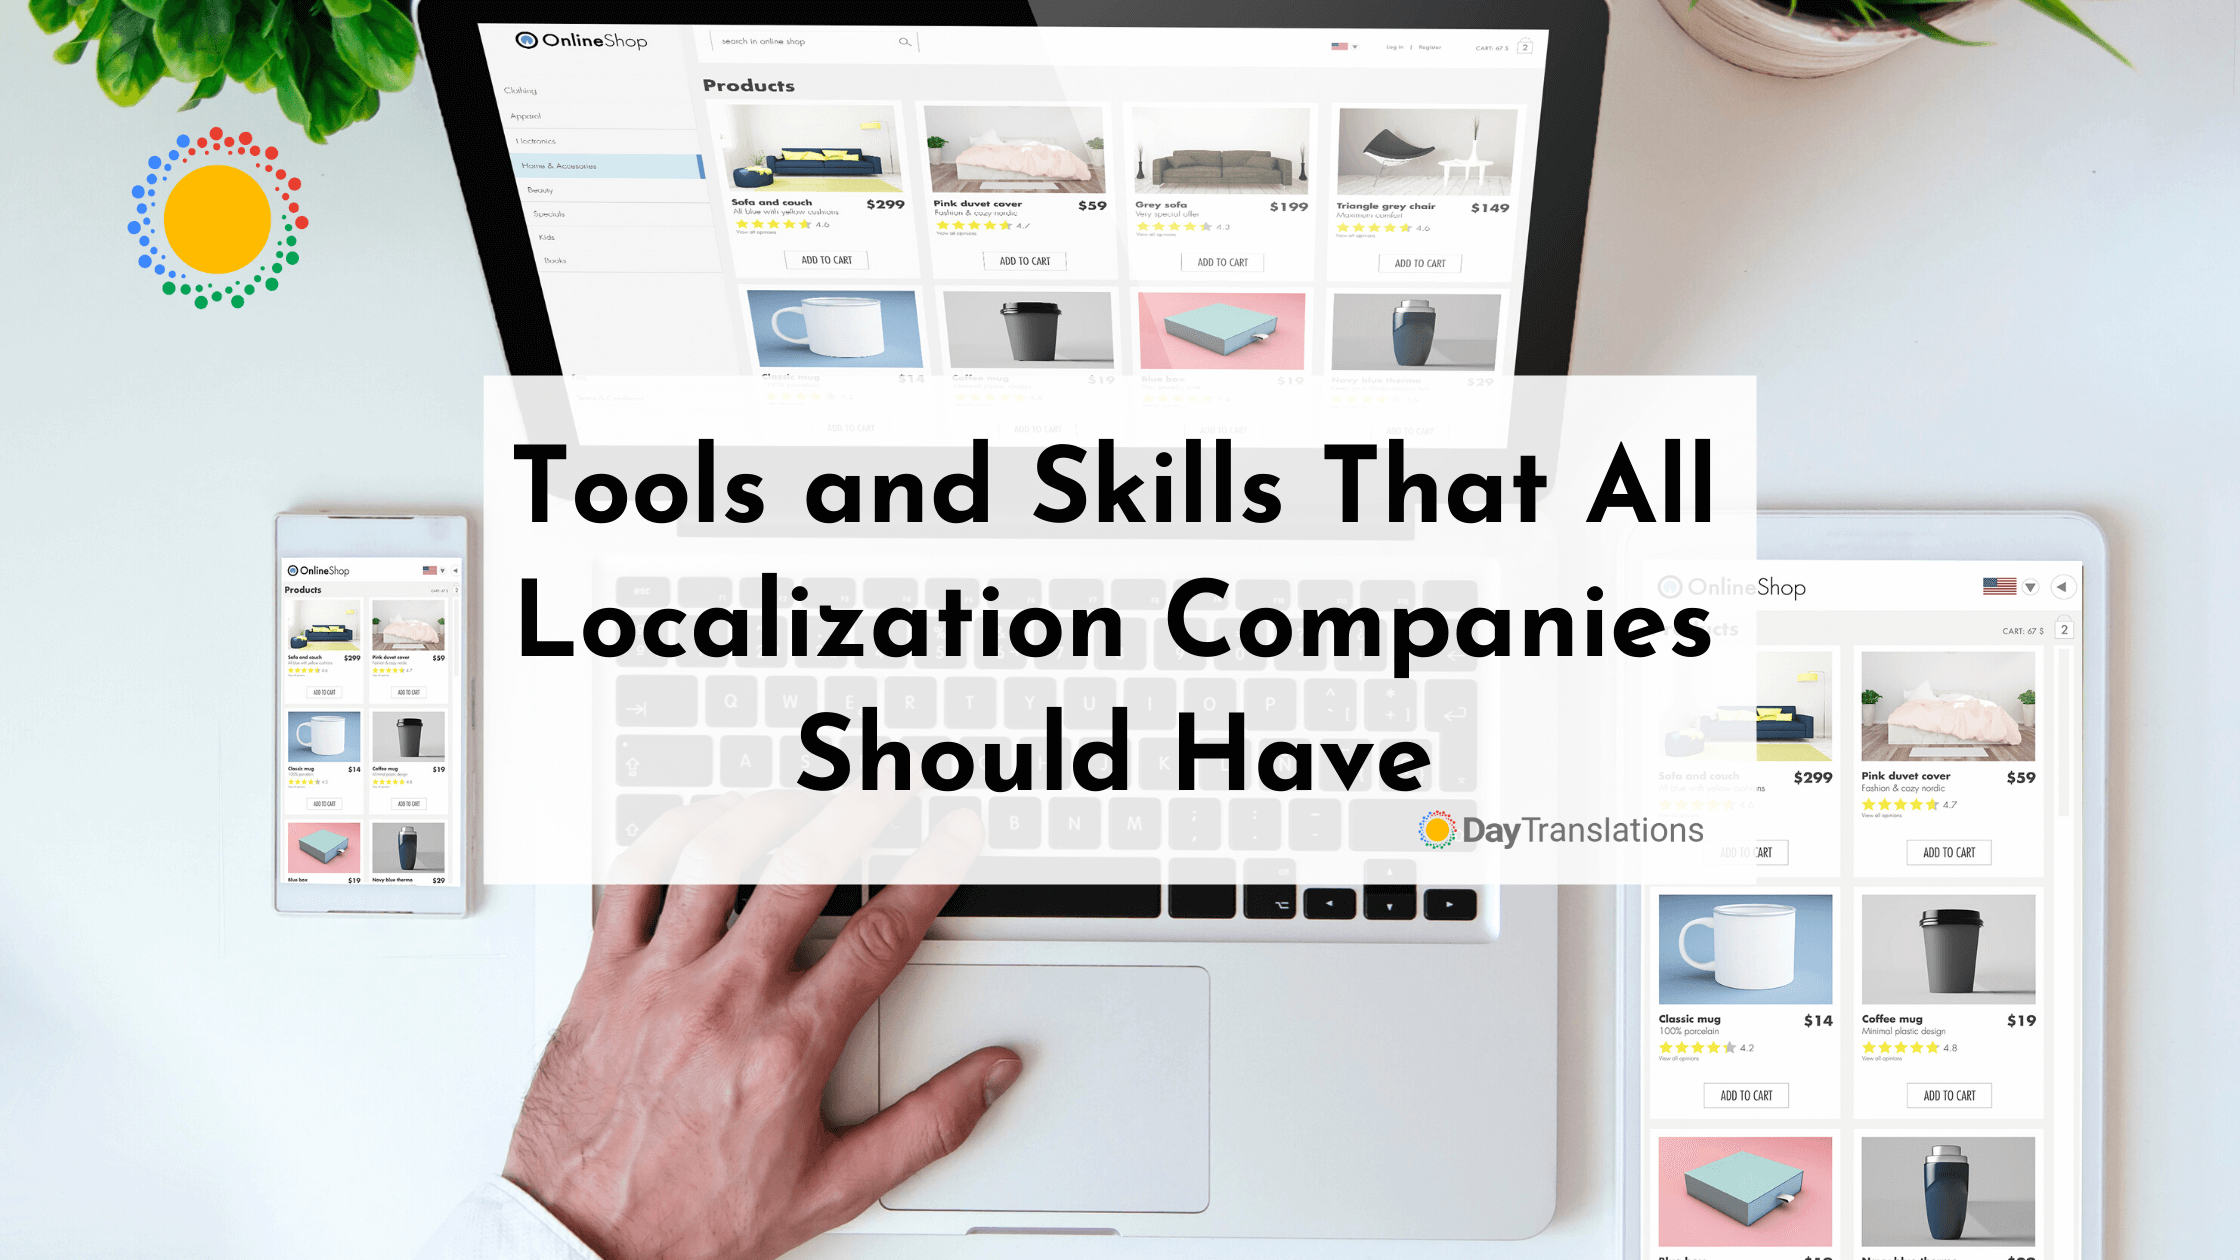 Tools and Skills for Localization: What Companies Should Have